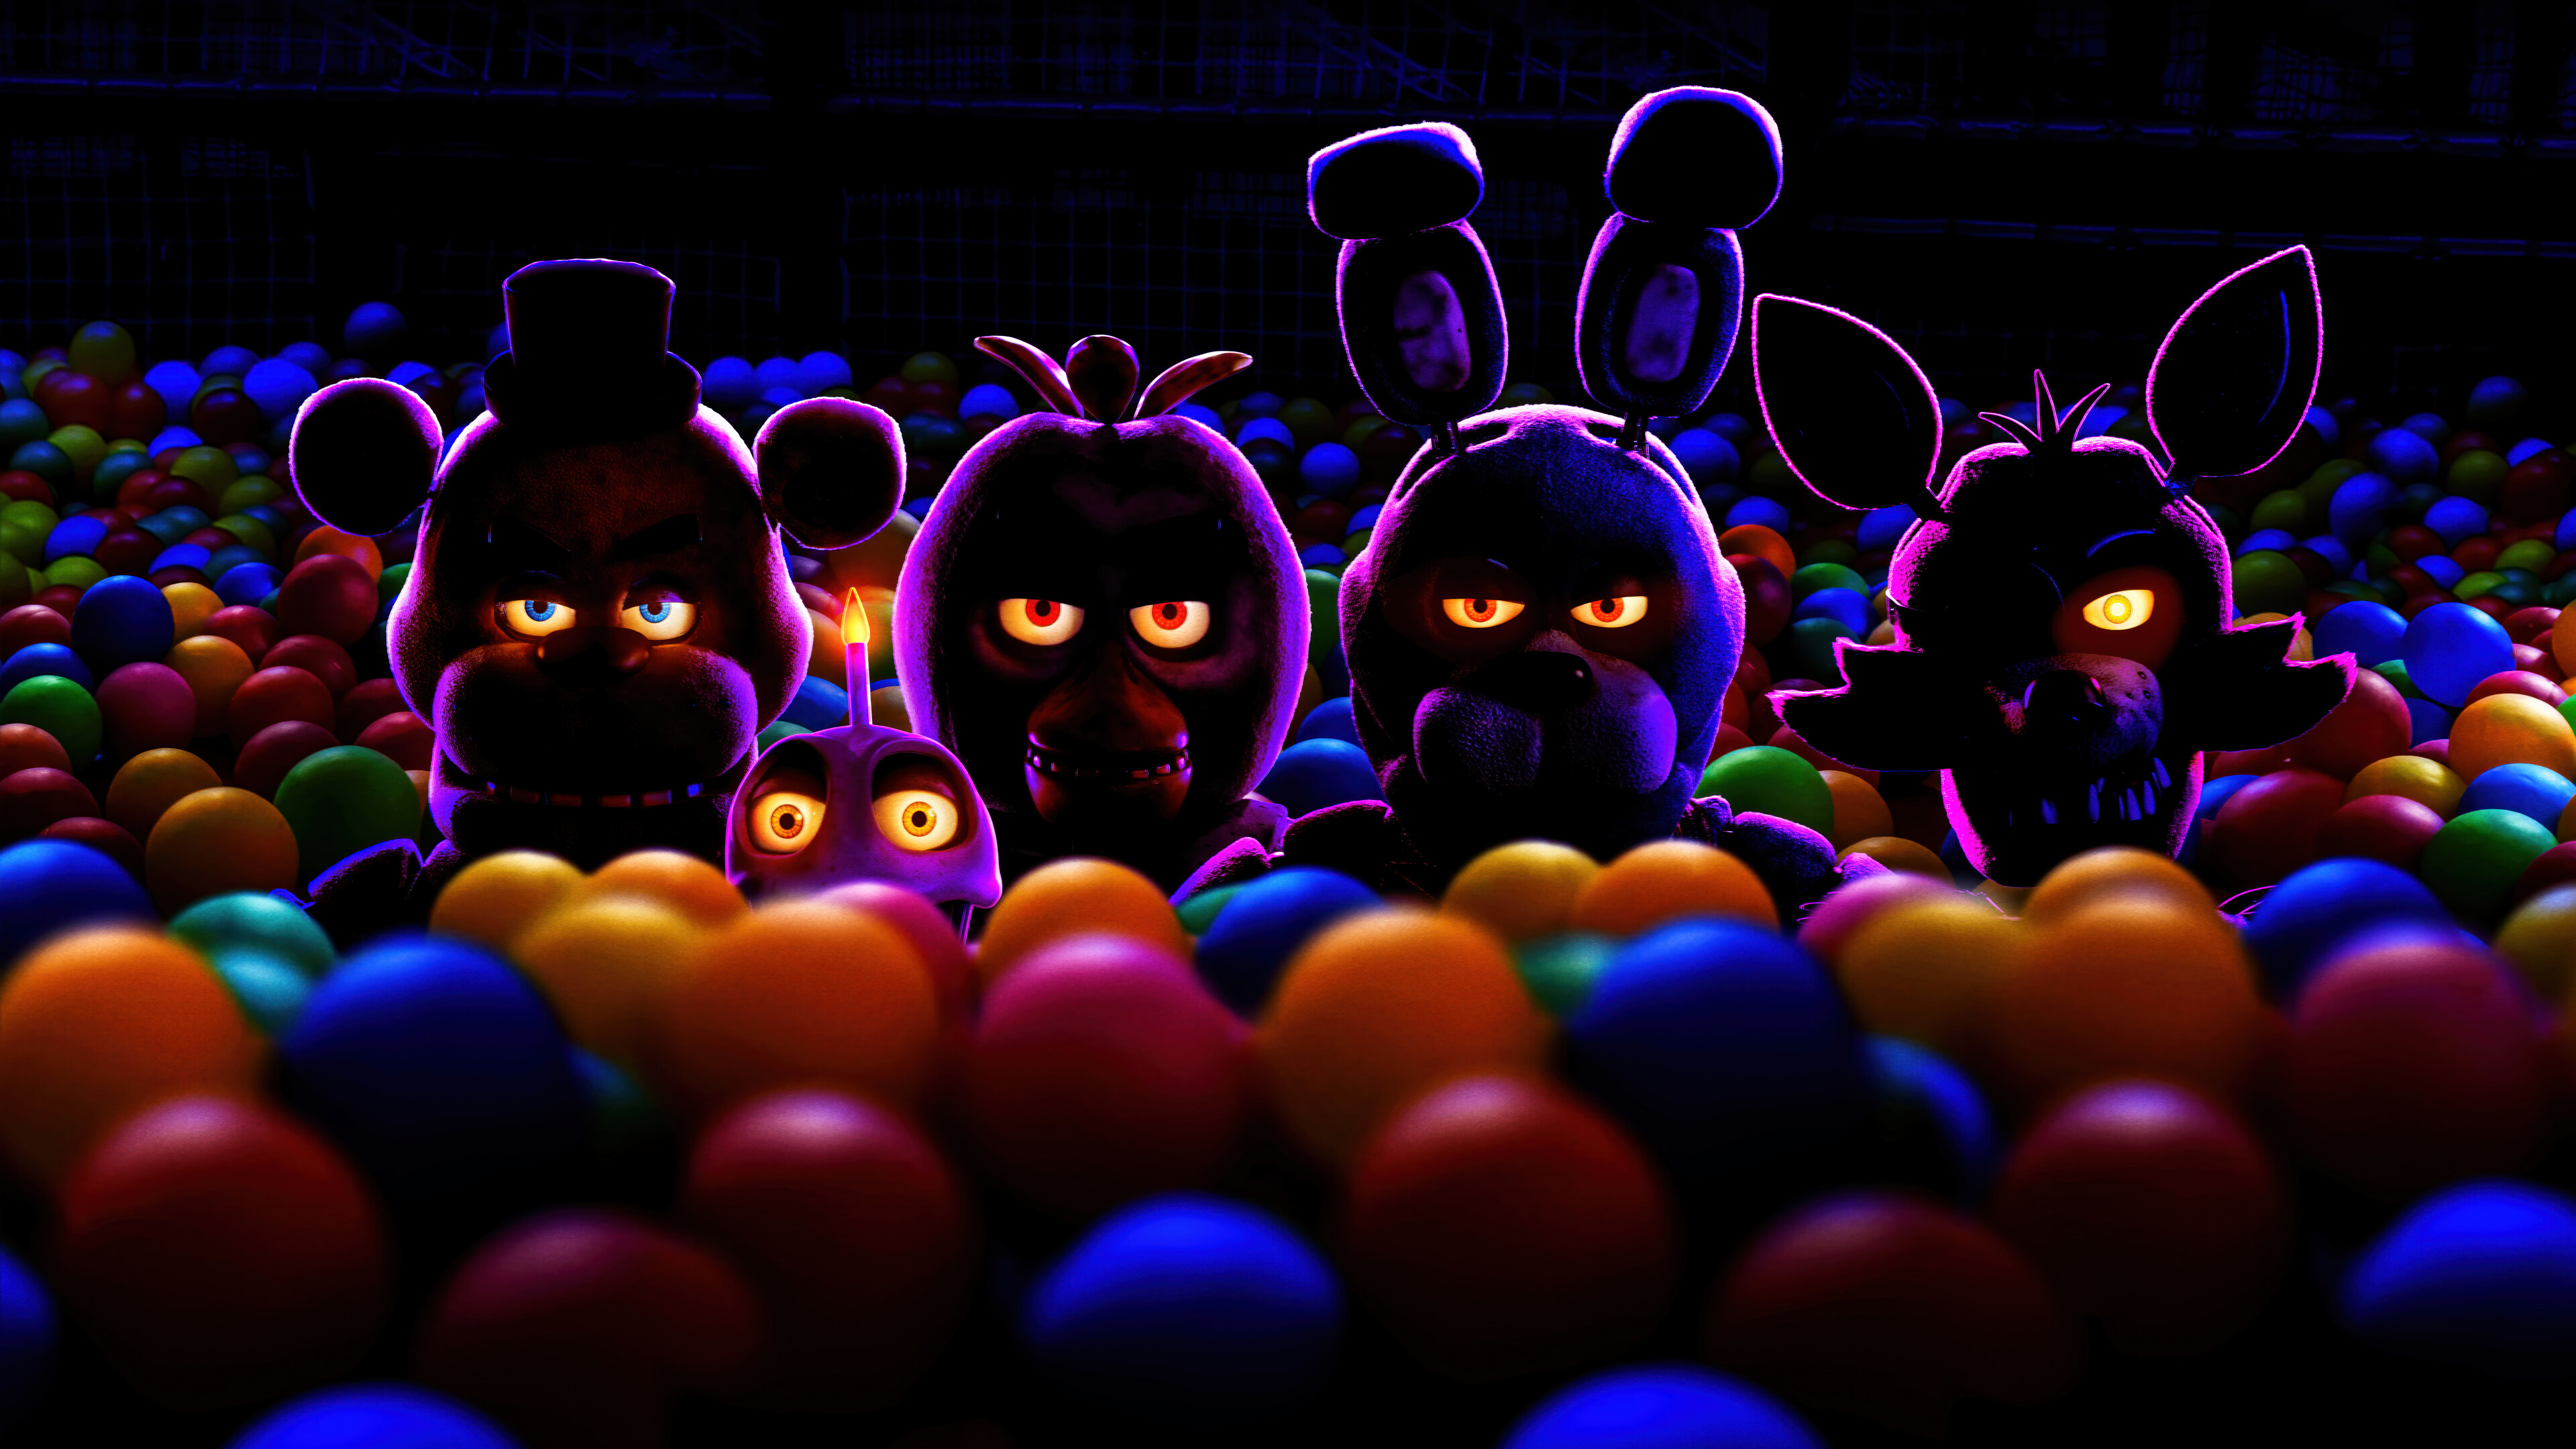 Five Nights at Freddy's characters peeking out from a colorful ball pit in HD desktop wallpaper background.